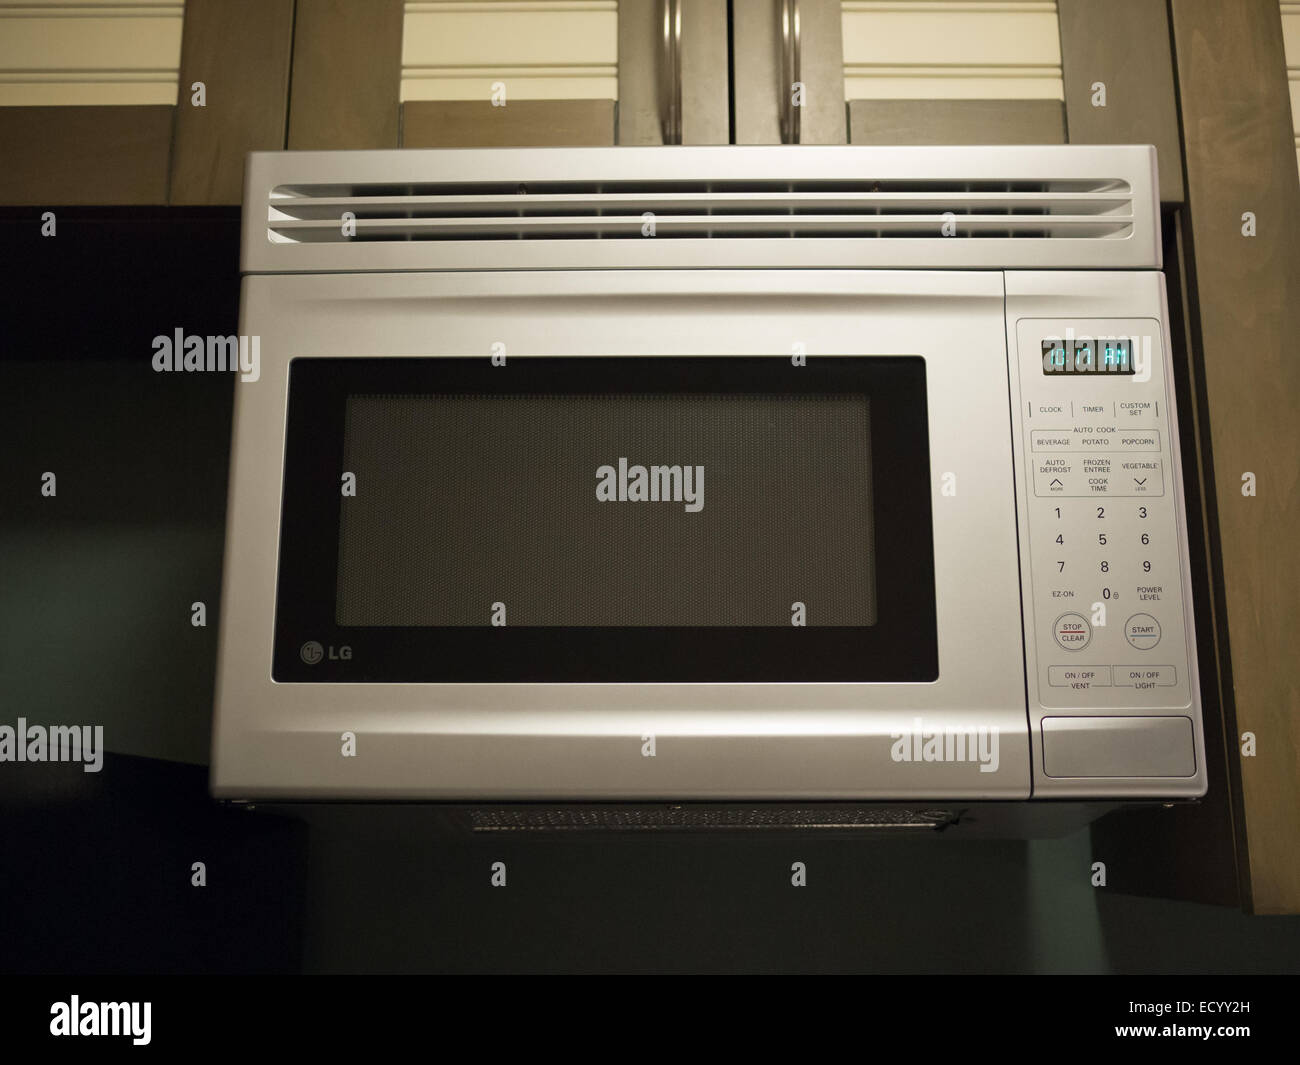 top mount stainless steel microwave oven Stock Photo